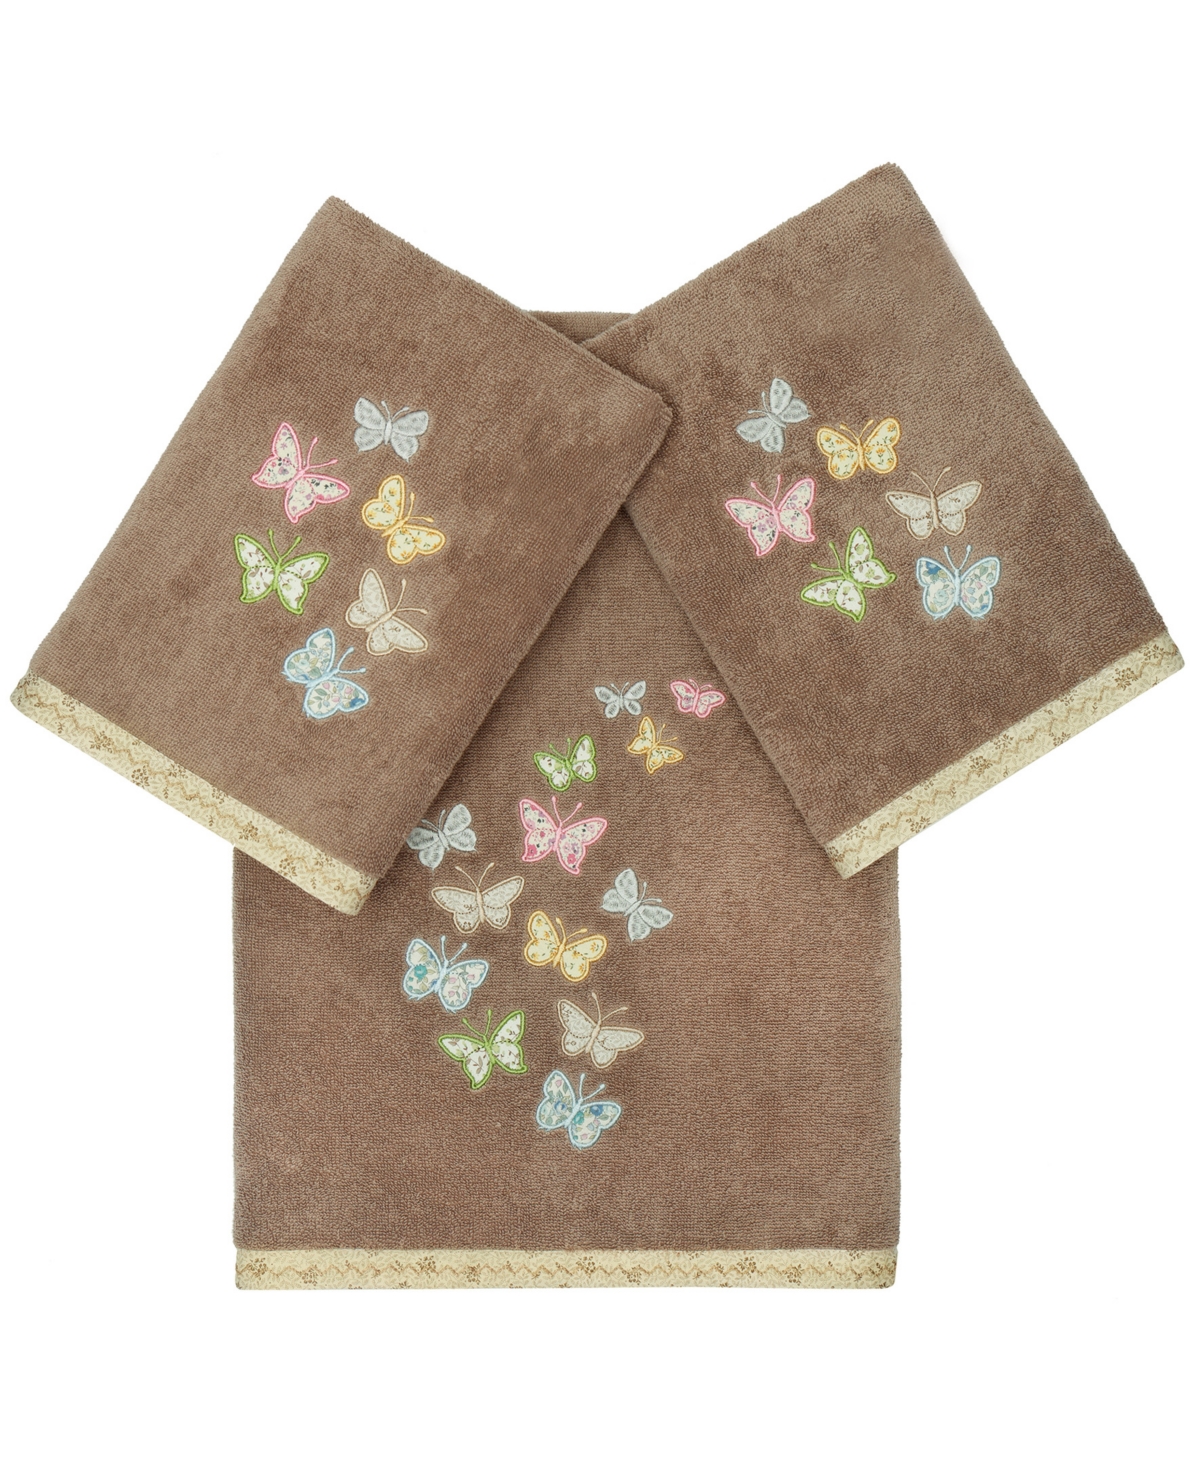 Linum Home Textiles Turkish Cotton Mariposa Embellished Towel Set, 3 Piece Bedding In Cocoa